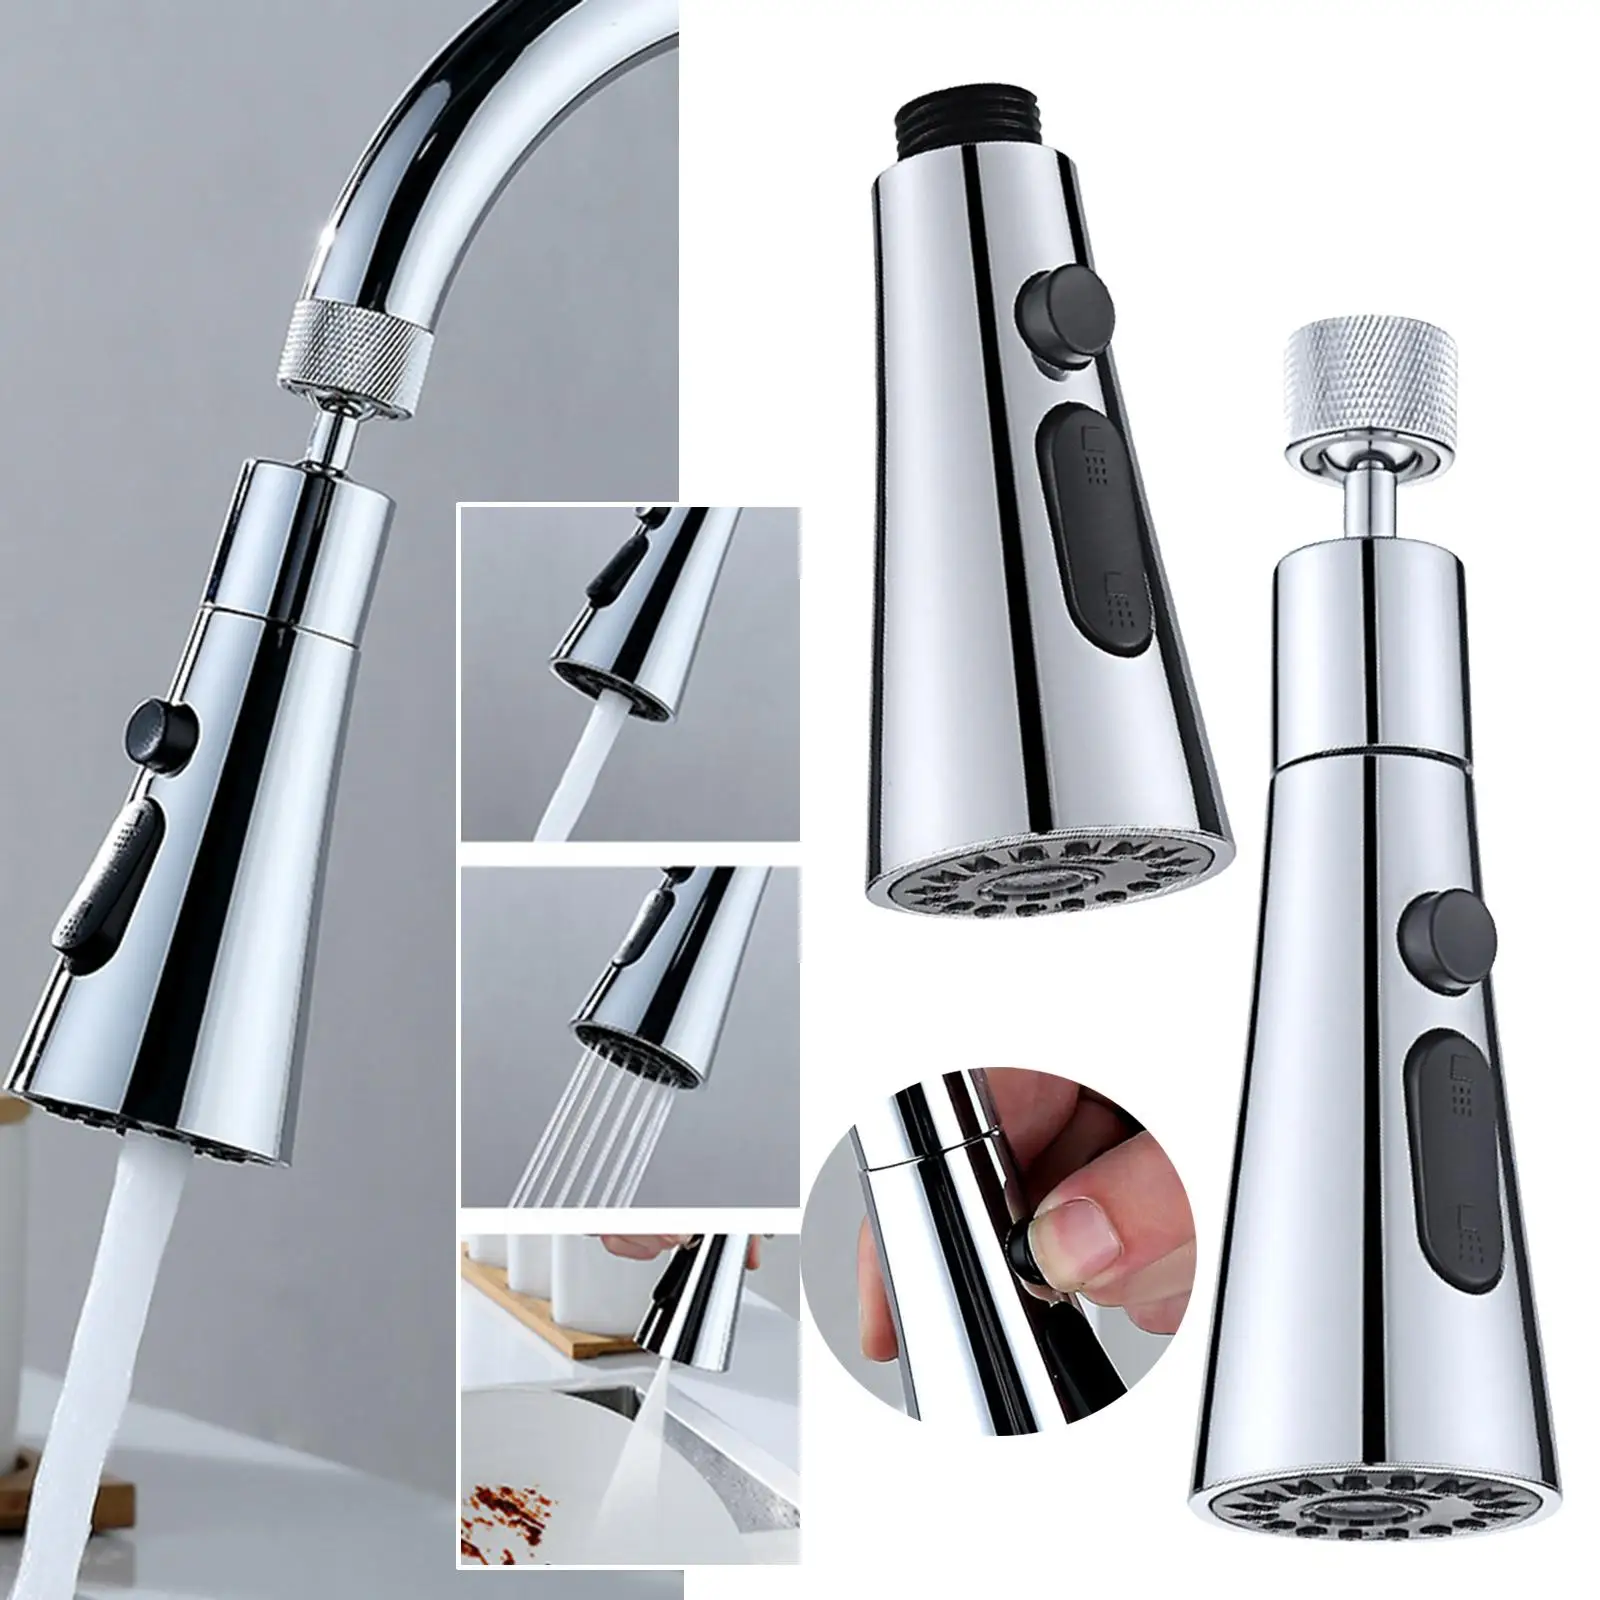 360 Degree Swivel Faucet Sprayer Attachment Sink Aerators Kitchen Sink Faucet Kitchen Sink Accessories for Kitchen Bathroom Home